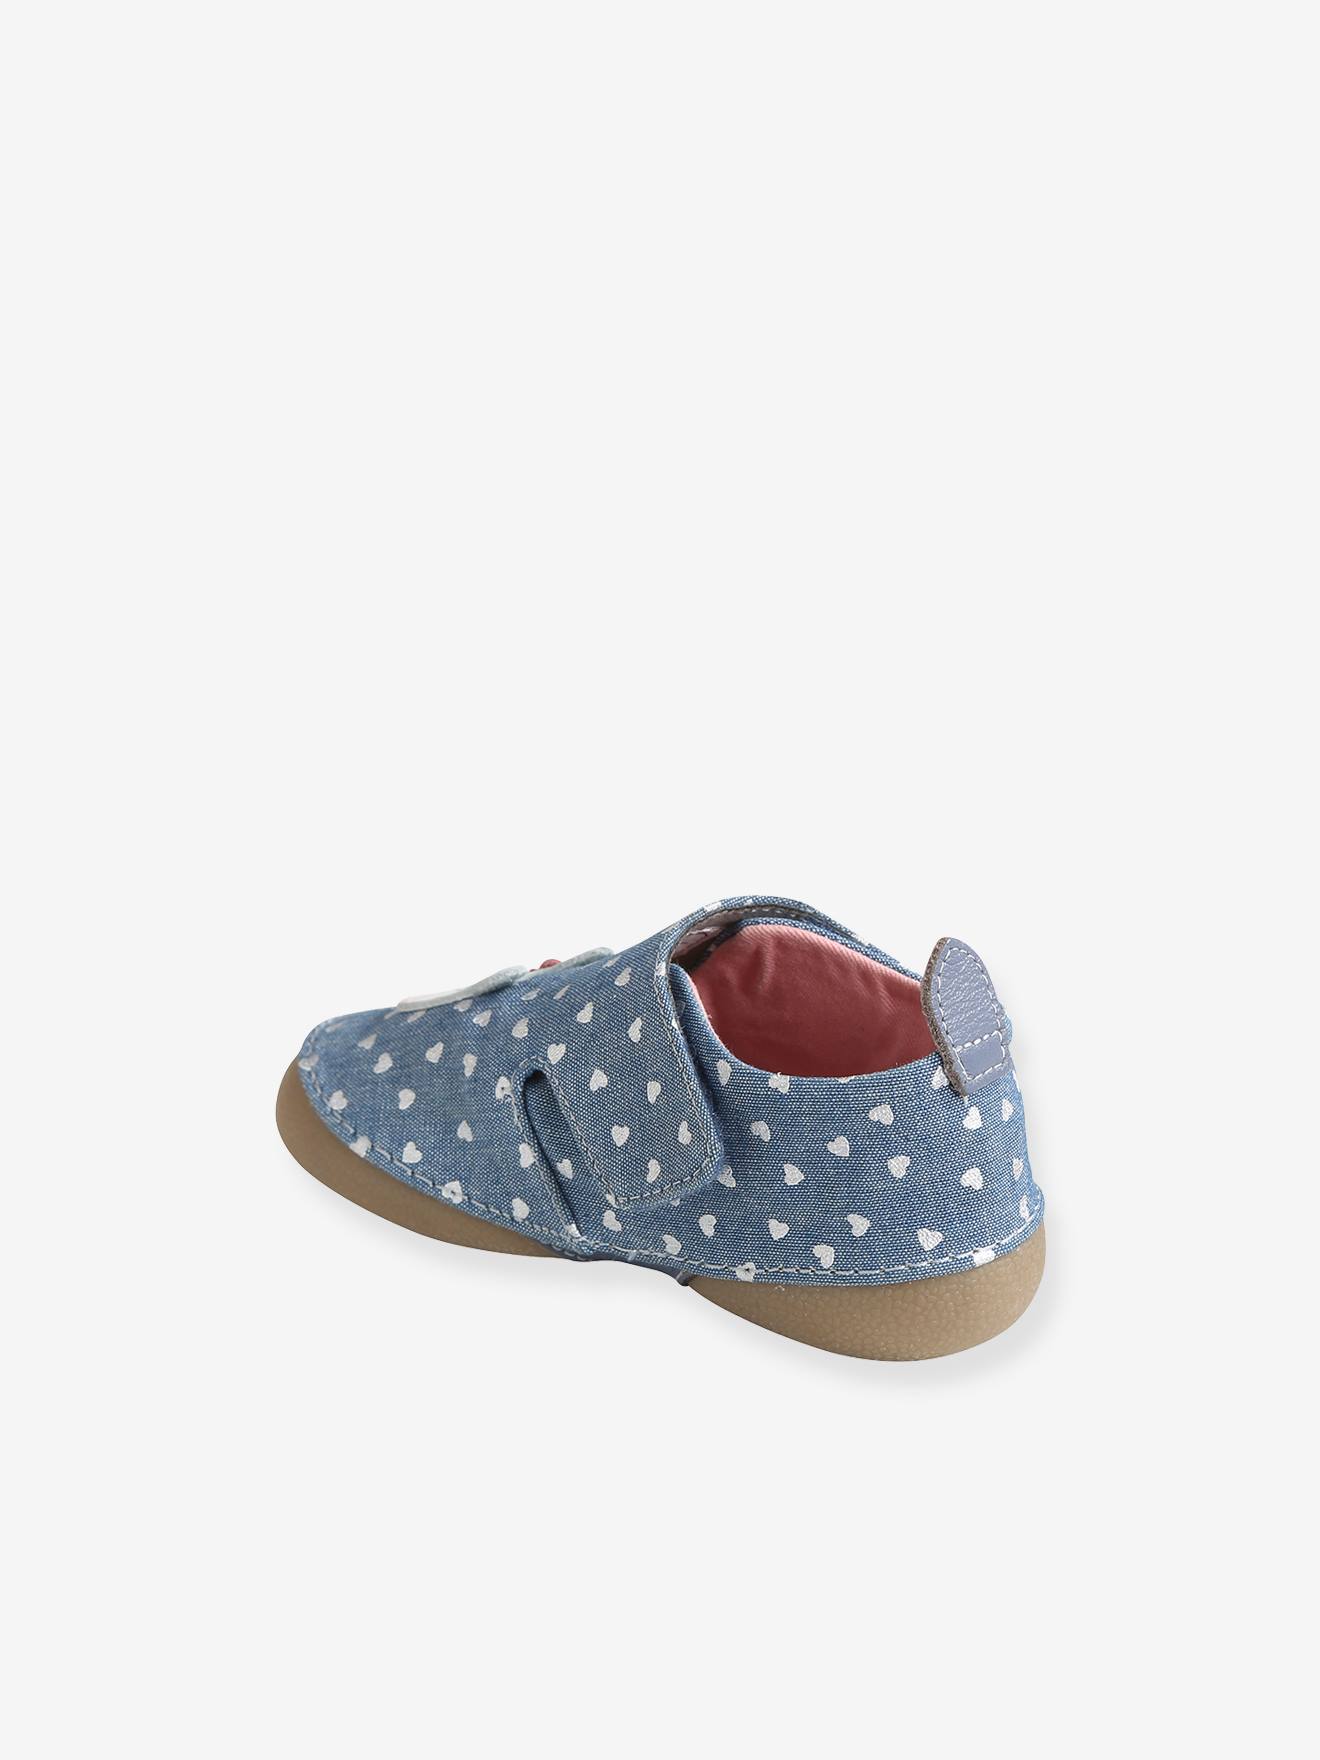 BABY BOYS PRAM SHOES WITH ANCHOR MOTIF BY SOFT TOUCH 